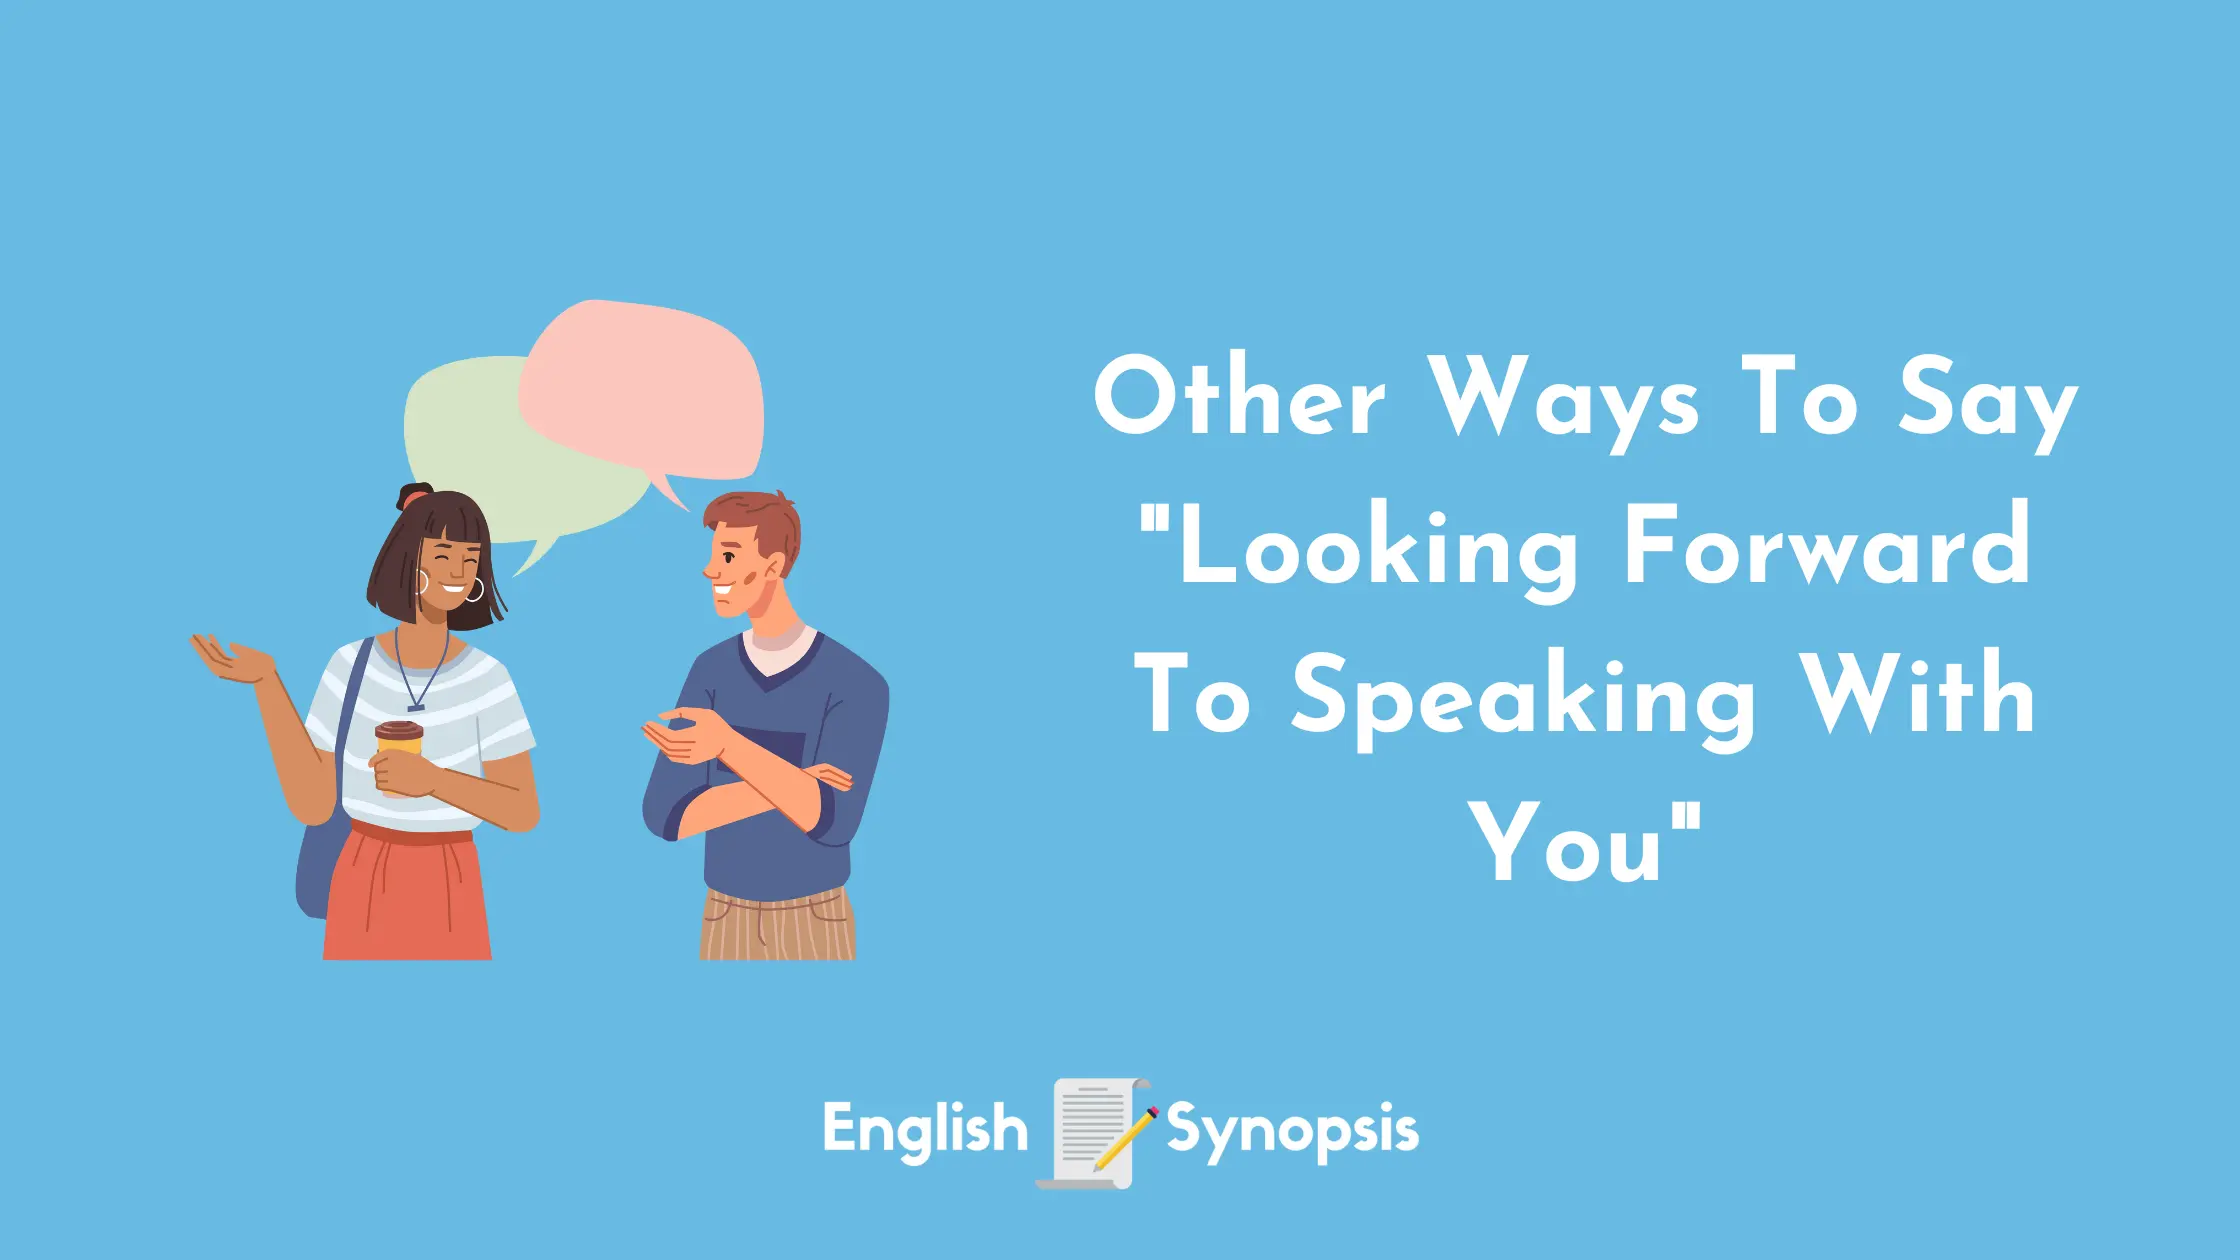 Other Ways To Say "Looking Forward To Speaking With You"